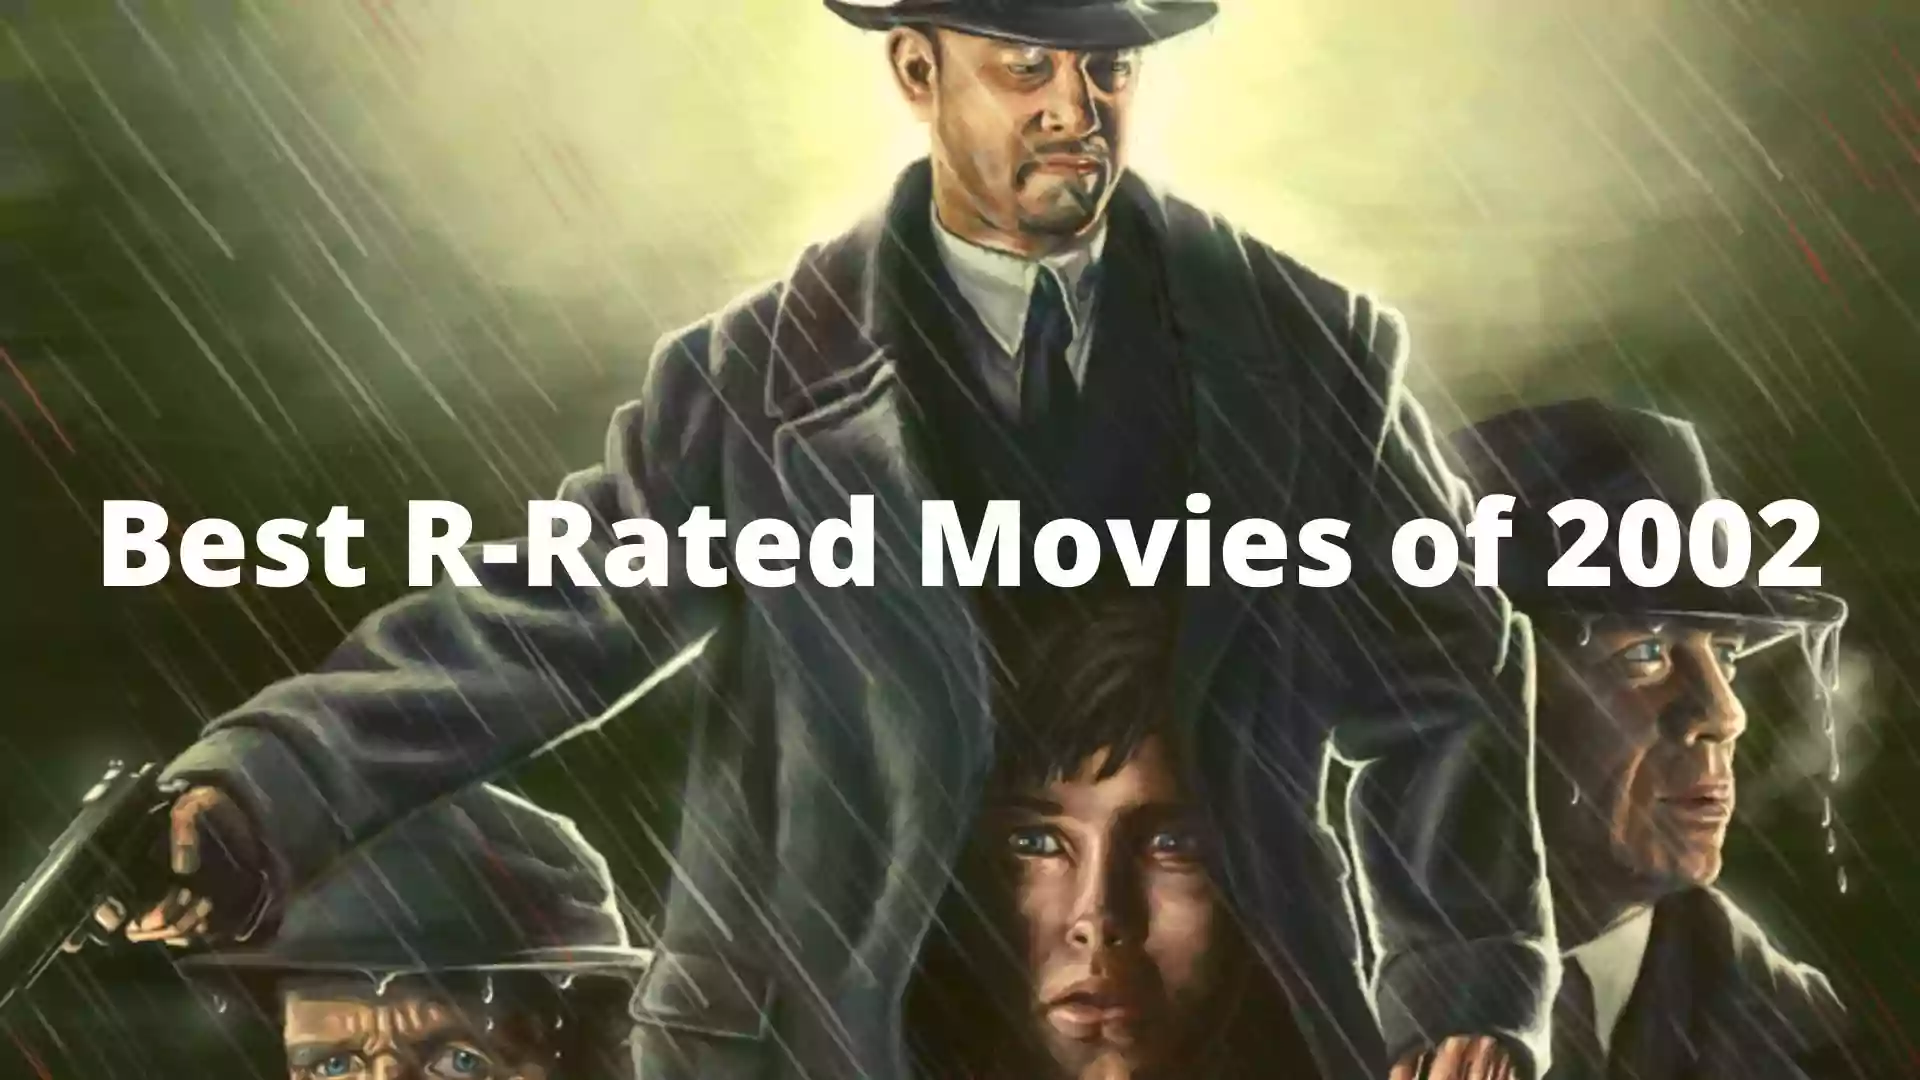 Best R-Rated Movies of 2002